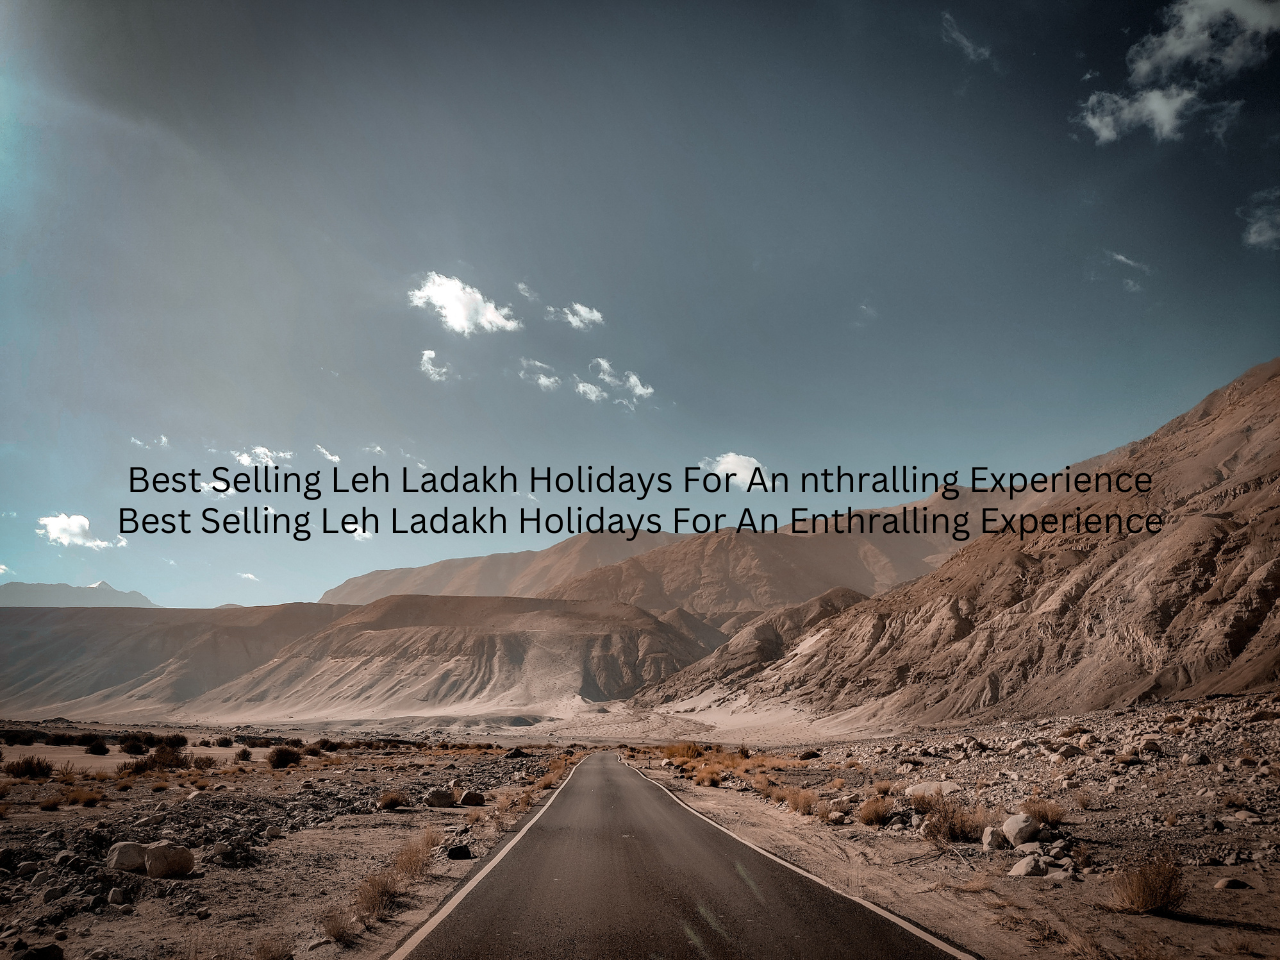 Best Selling Leh Ladakh Holidays For An Enthralling Experience